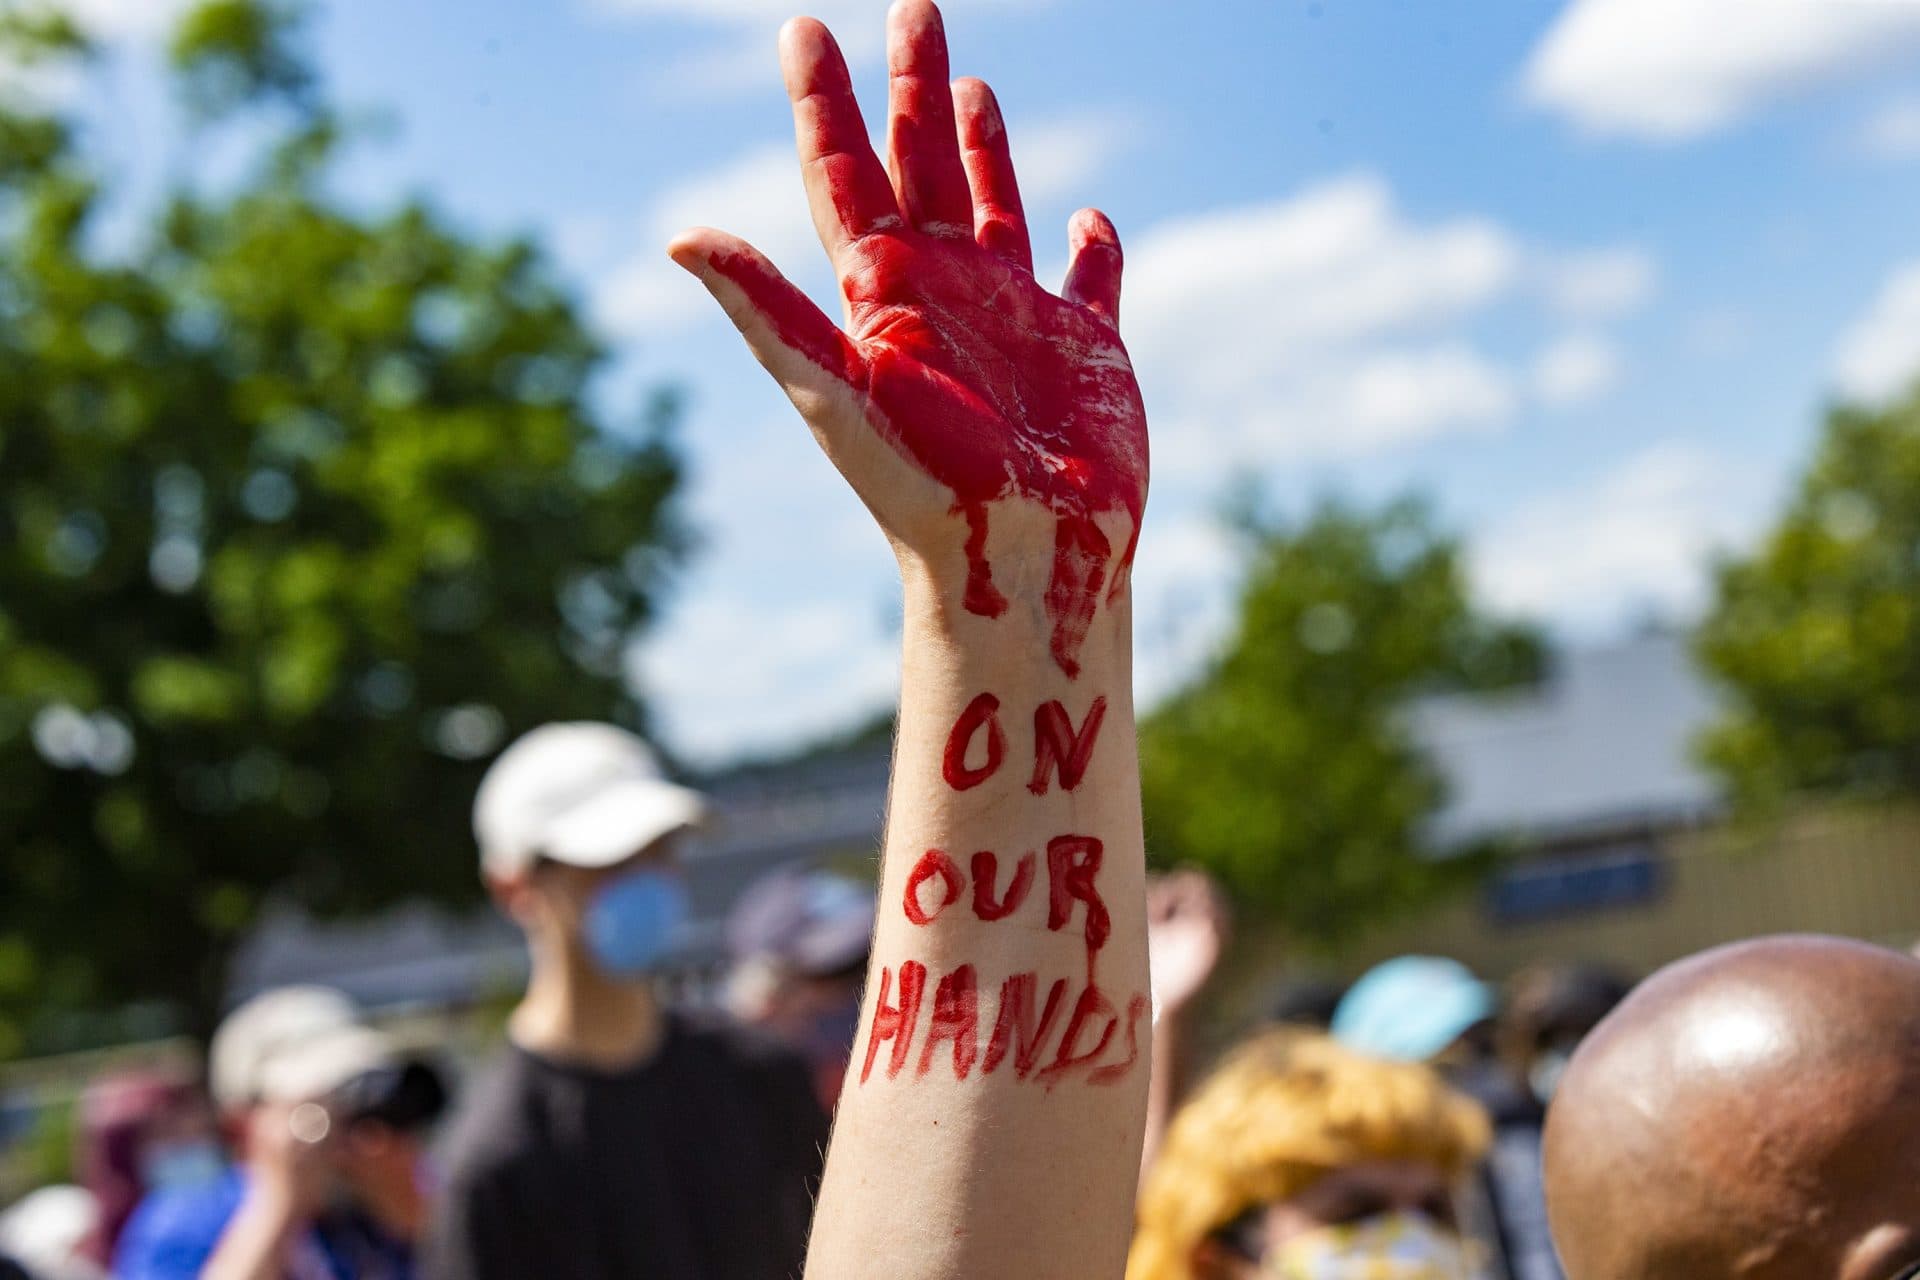 A rally participant with the “[Blood] on our hands” written on her arm at the Black Lives Matter rally in Fields Corner. (Jesse Costa/WBUR)